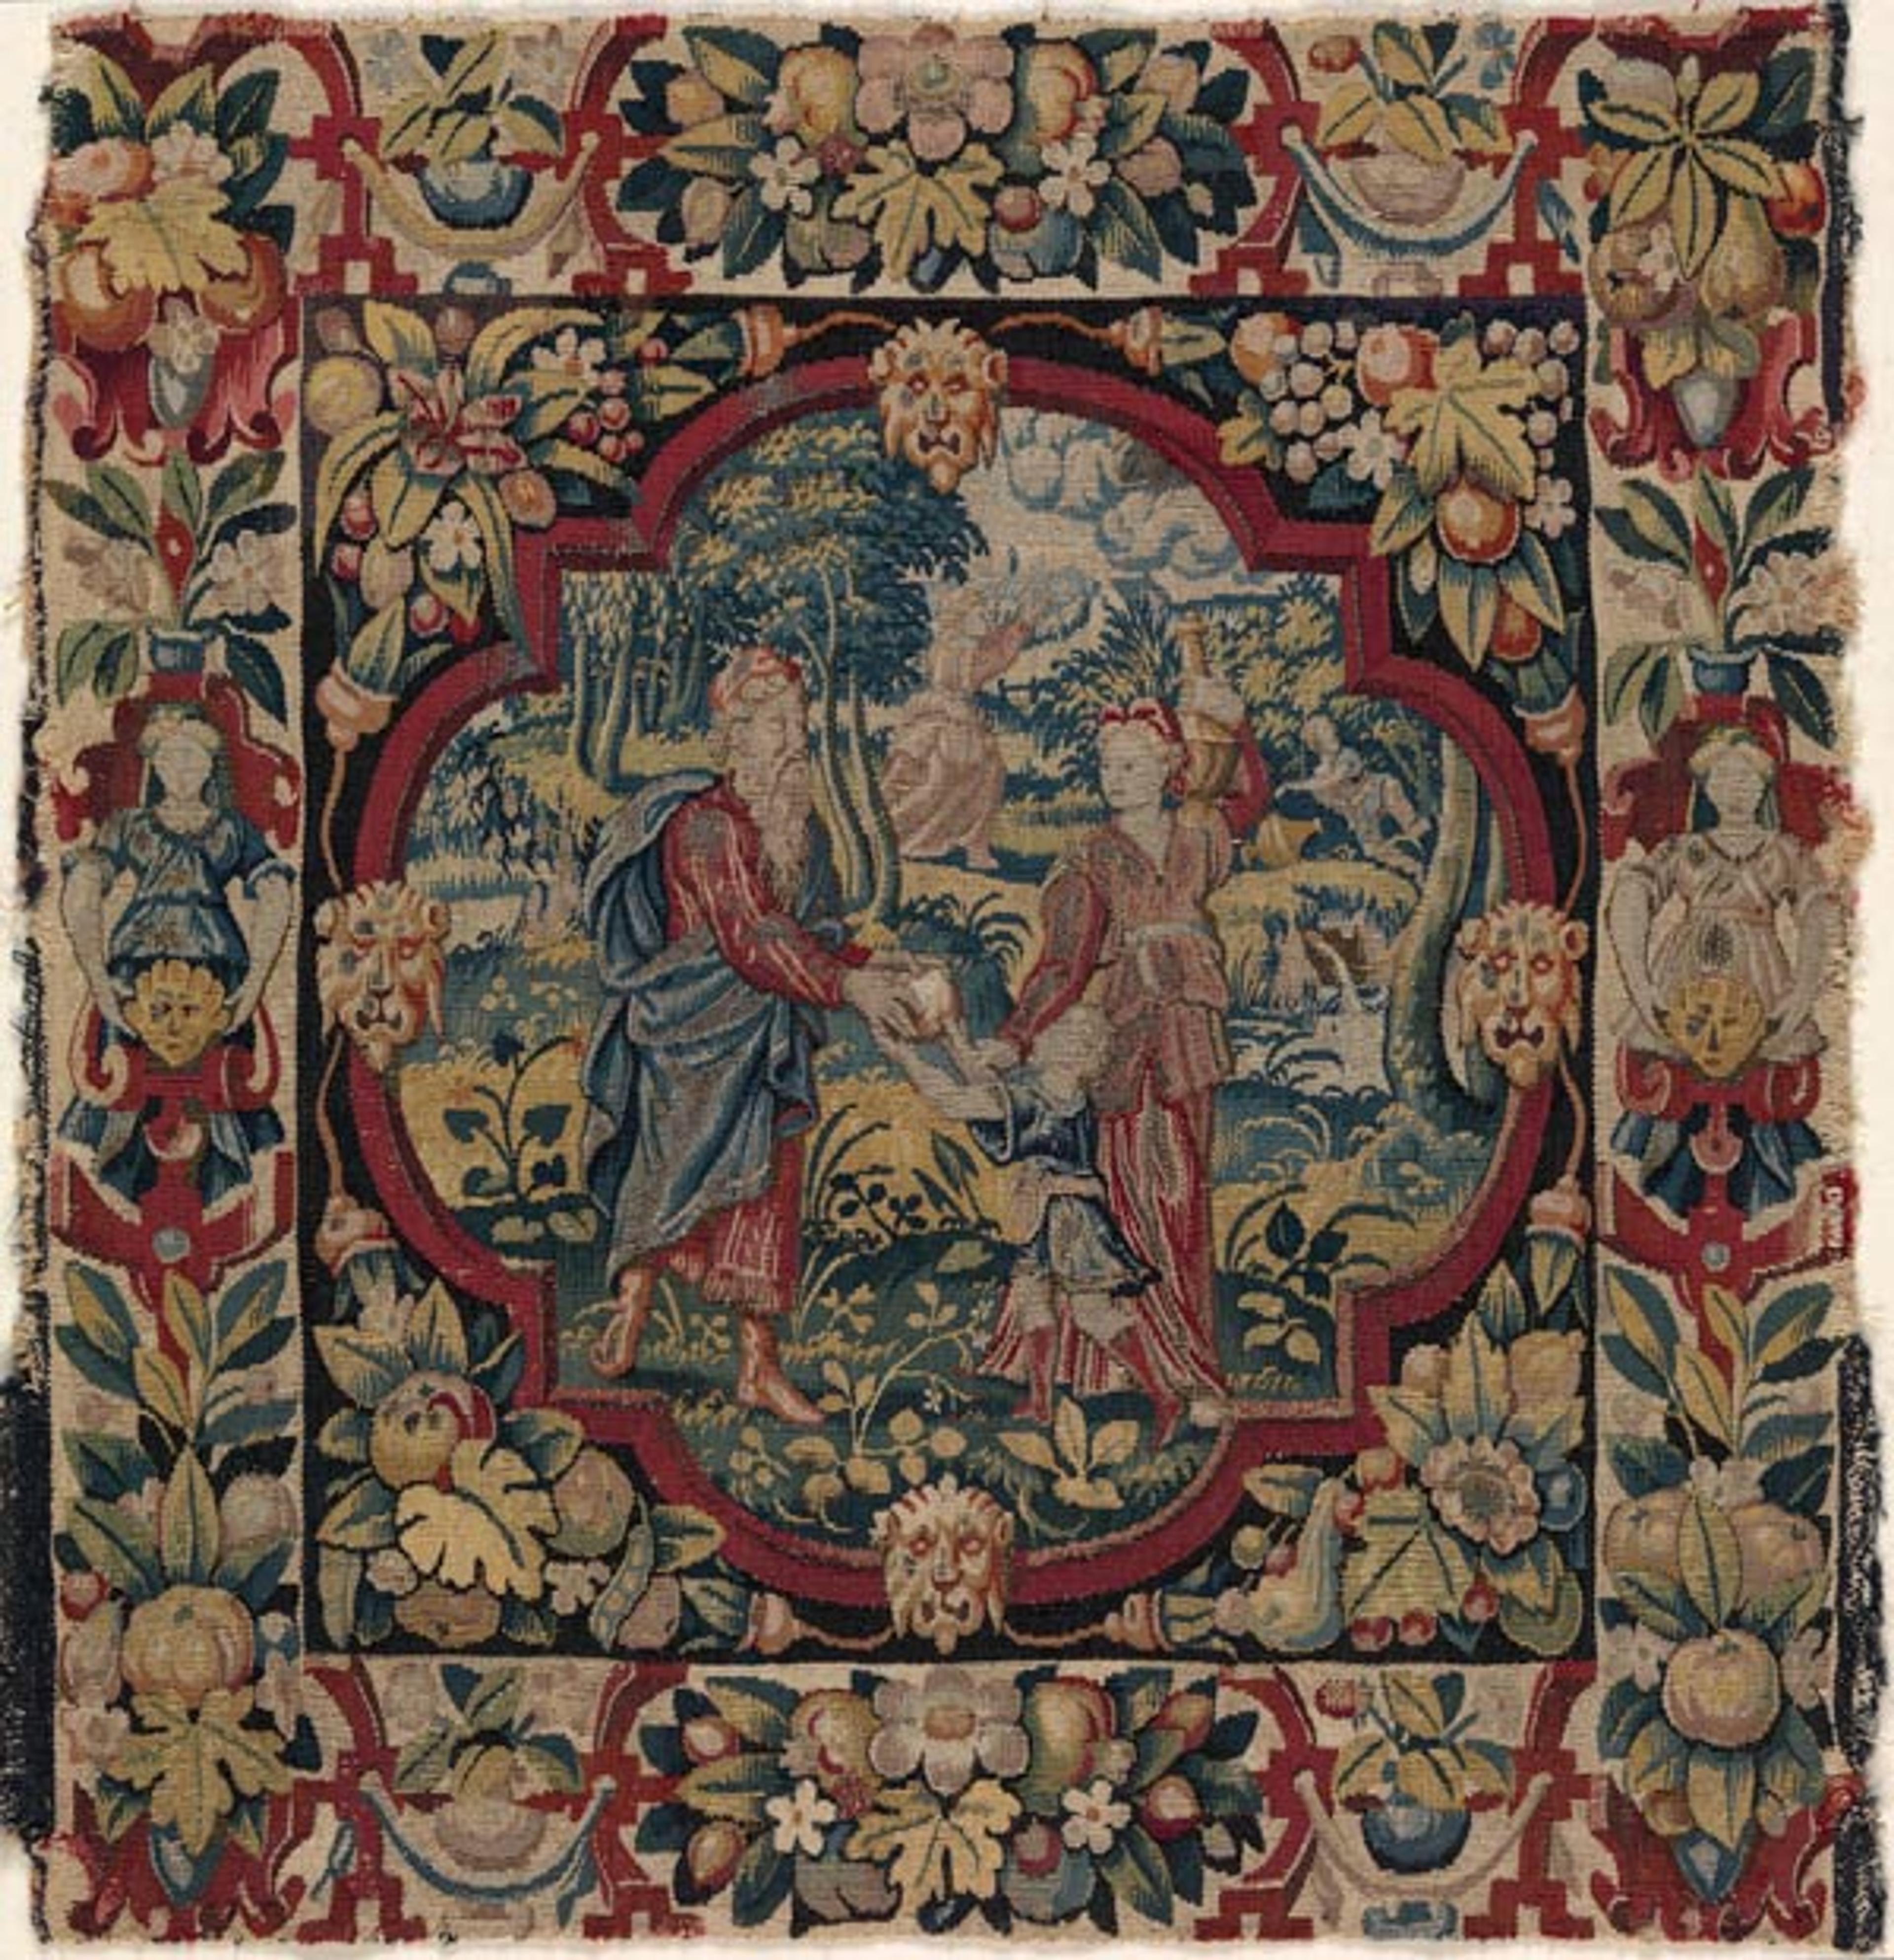 The second in a set of six tapestry-woven cushion covers depicting "The Expulsion of Hagar" from Scenes from the Lives of Abraham and Isaac. Flemish, ca. 1600 (41.100.57d)